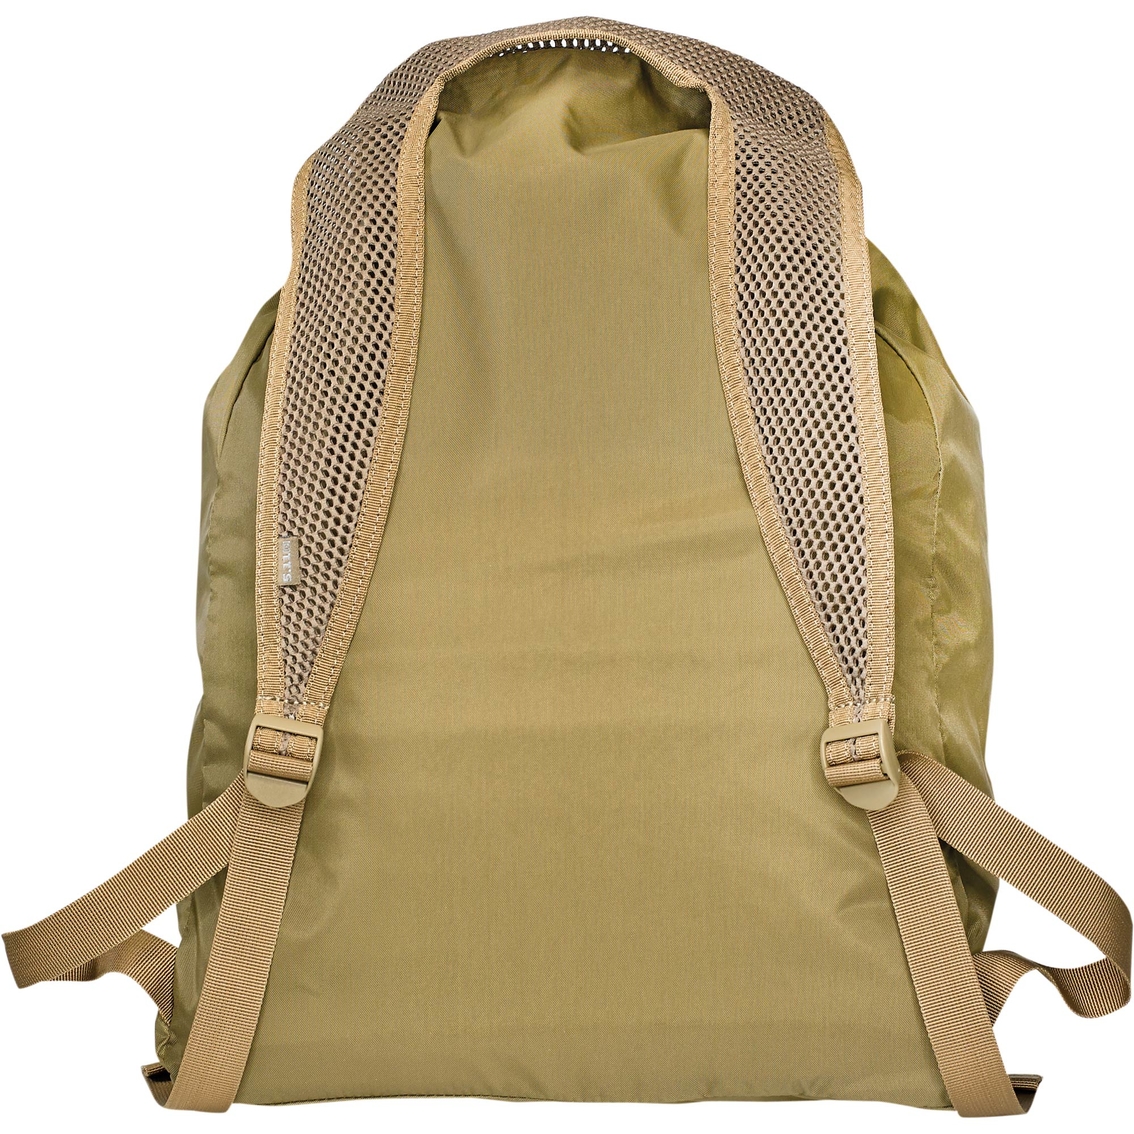 5.11 Rapid Excursion Pack - Image 2 of 2